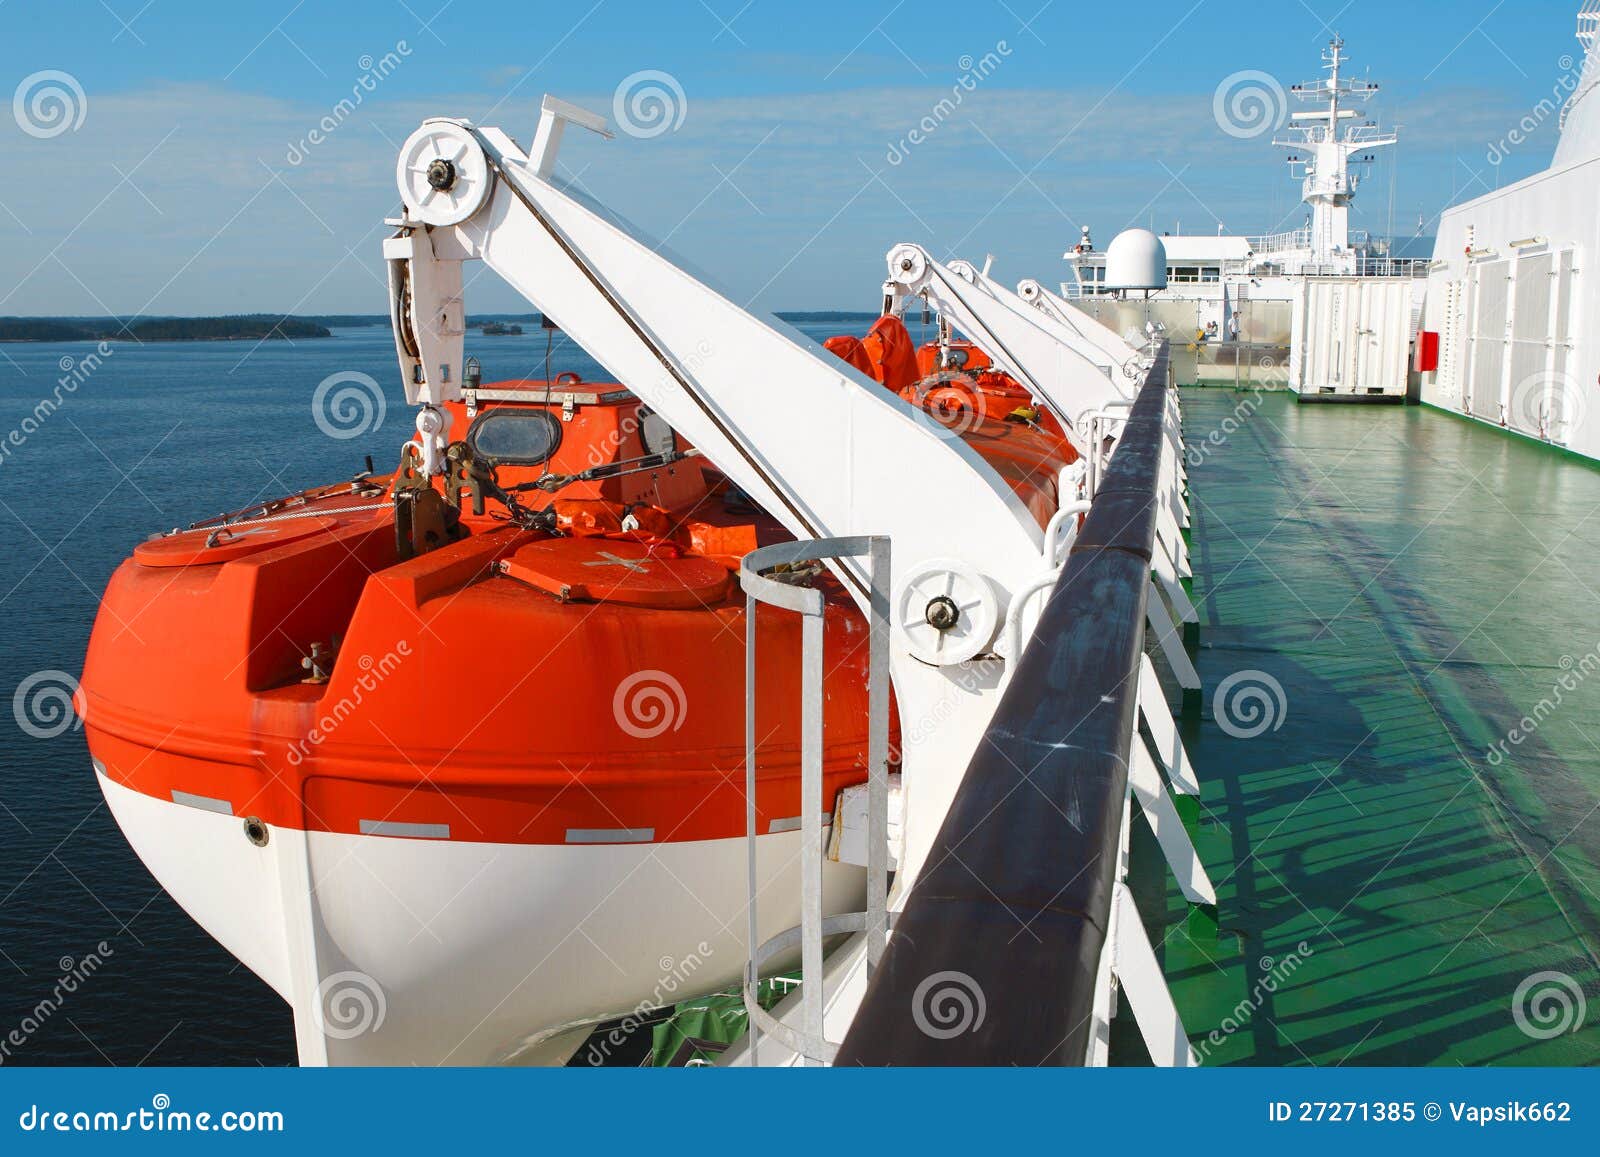 rescue boat on cruise ship royalty free stock photo